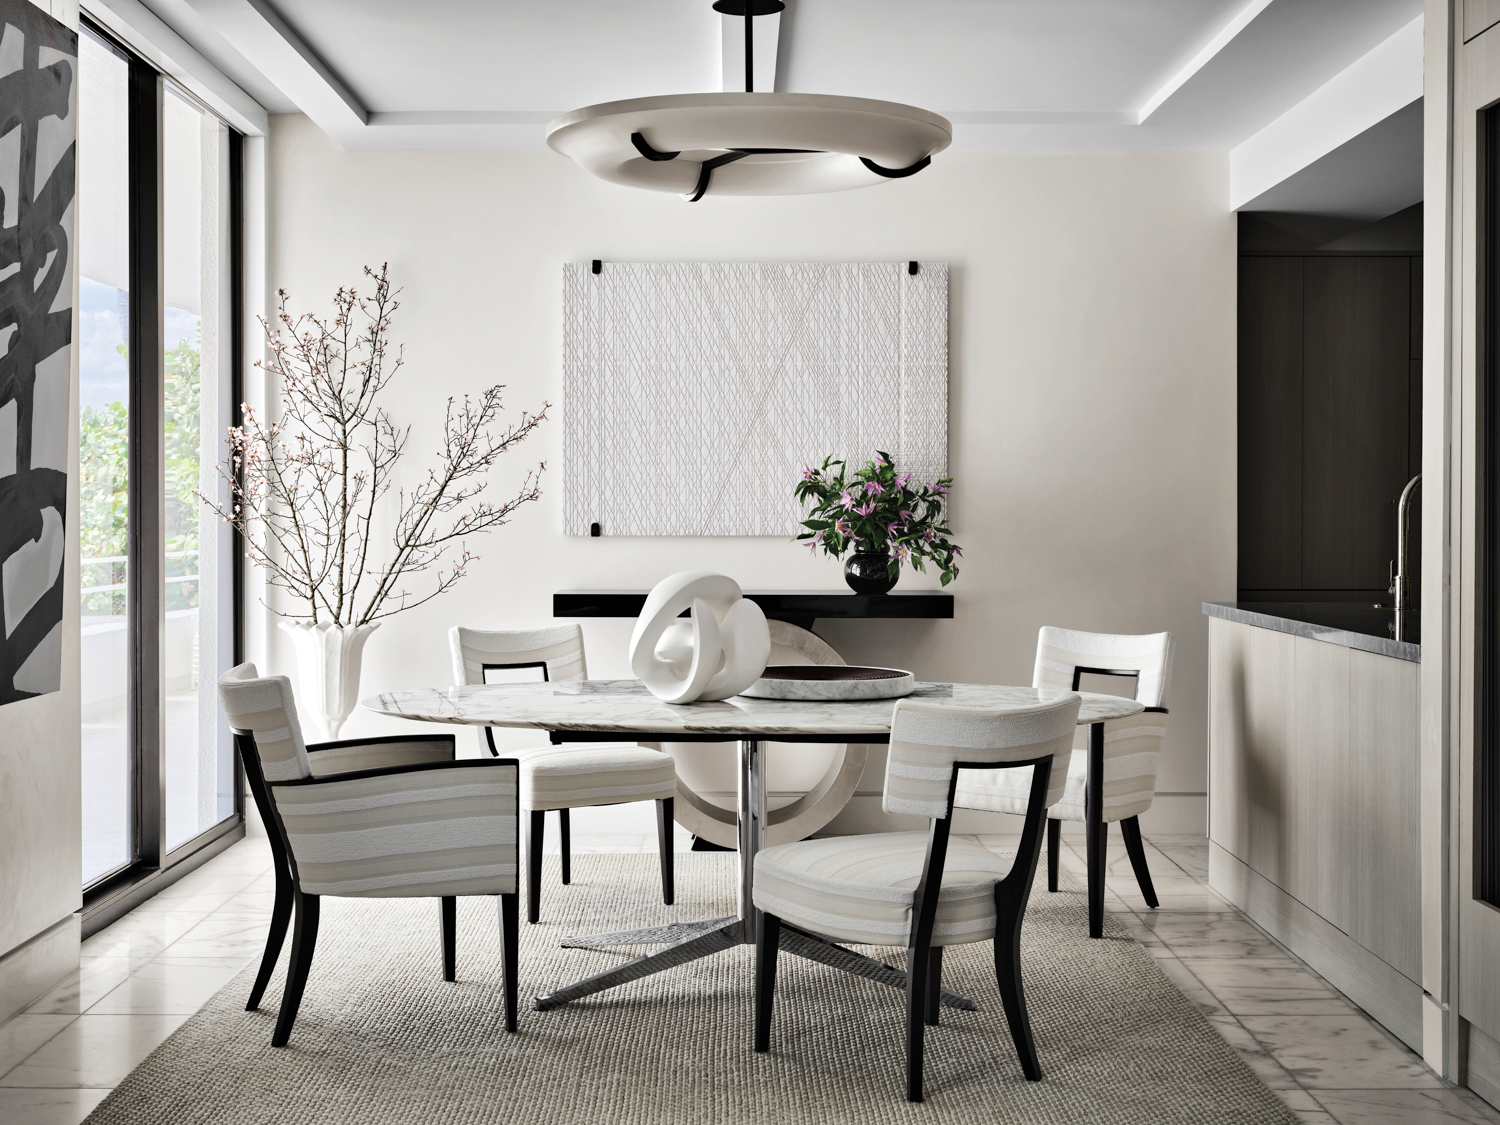 all-white dining area with round...